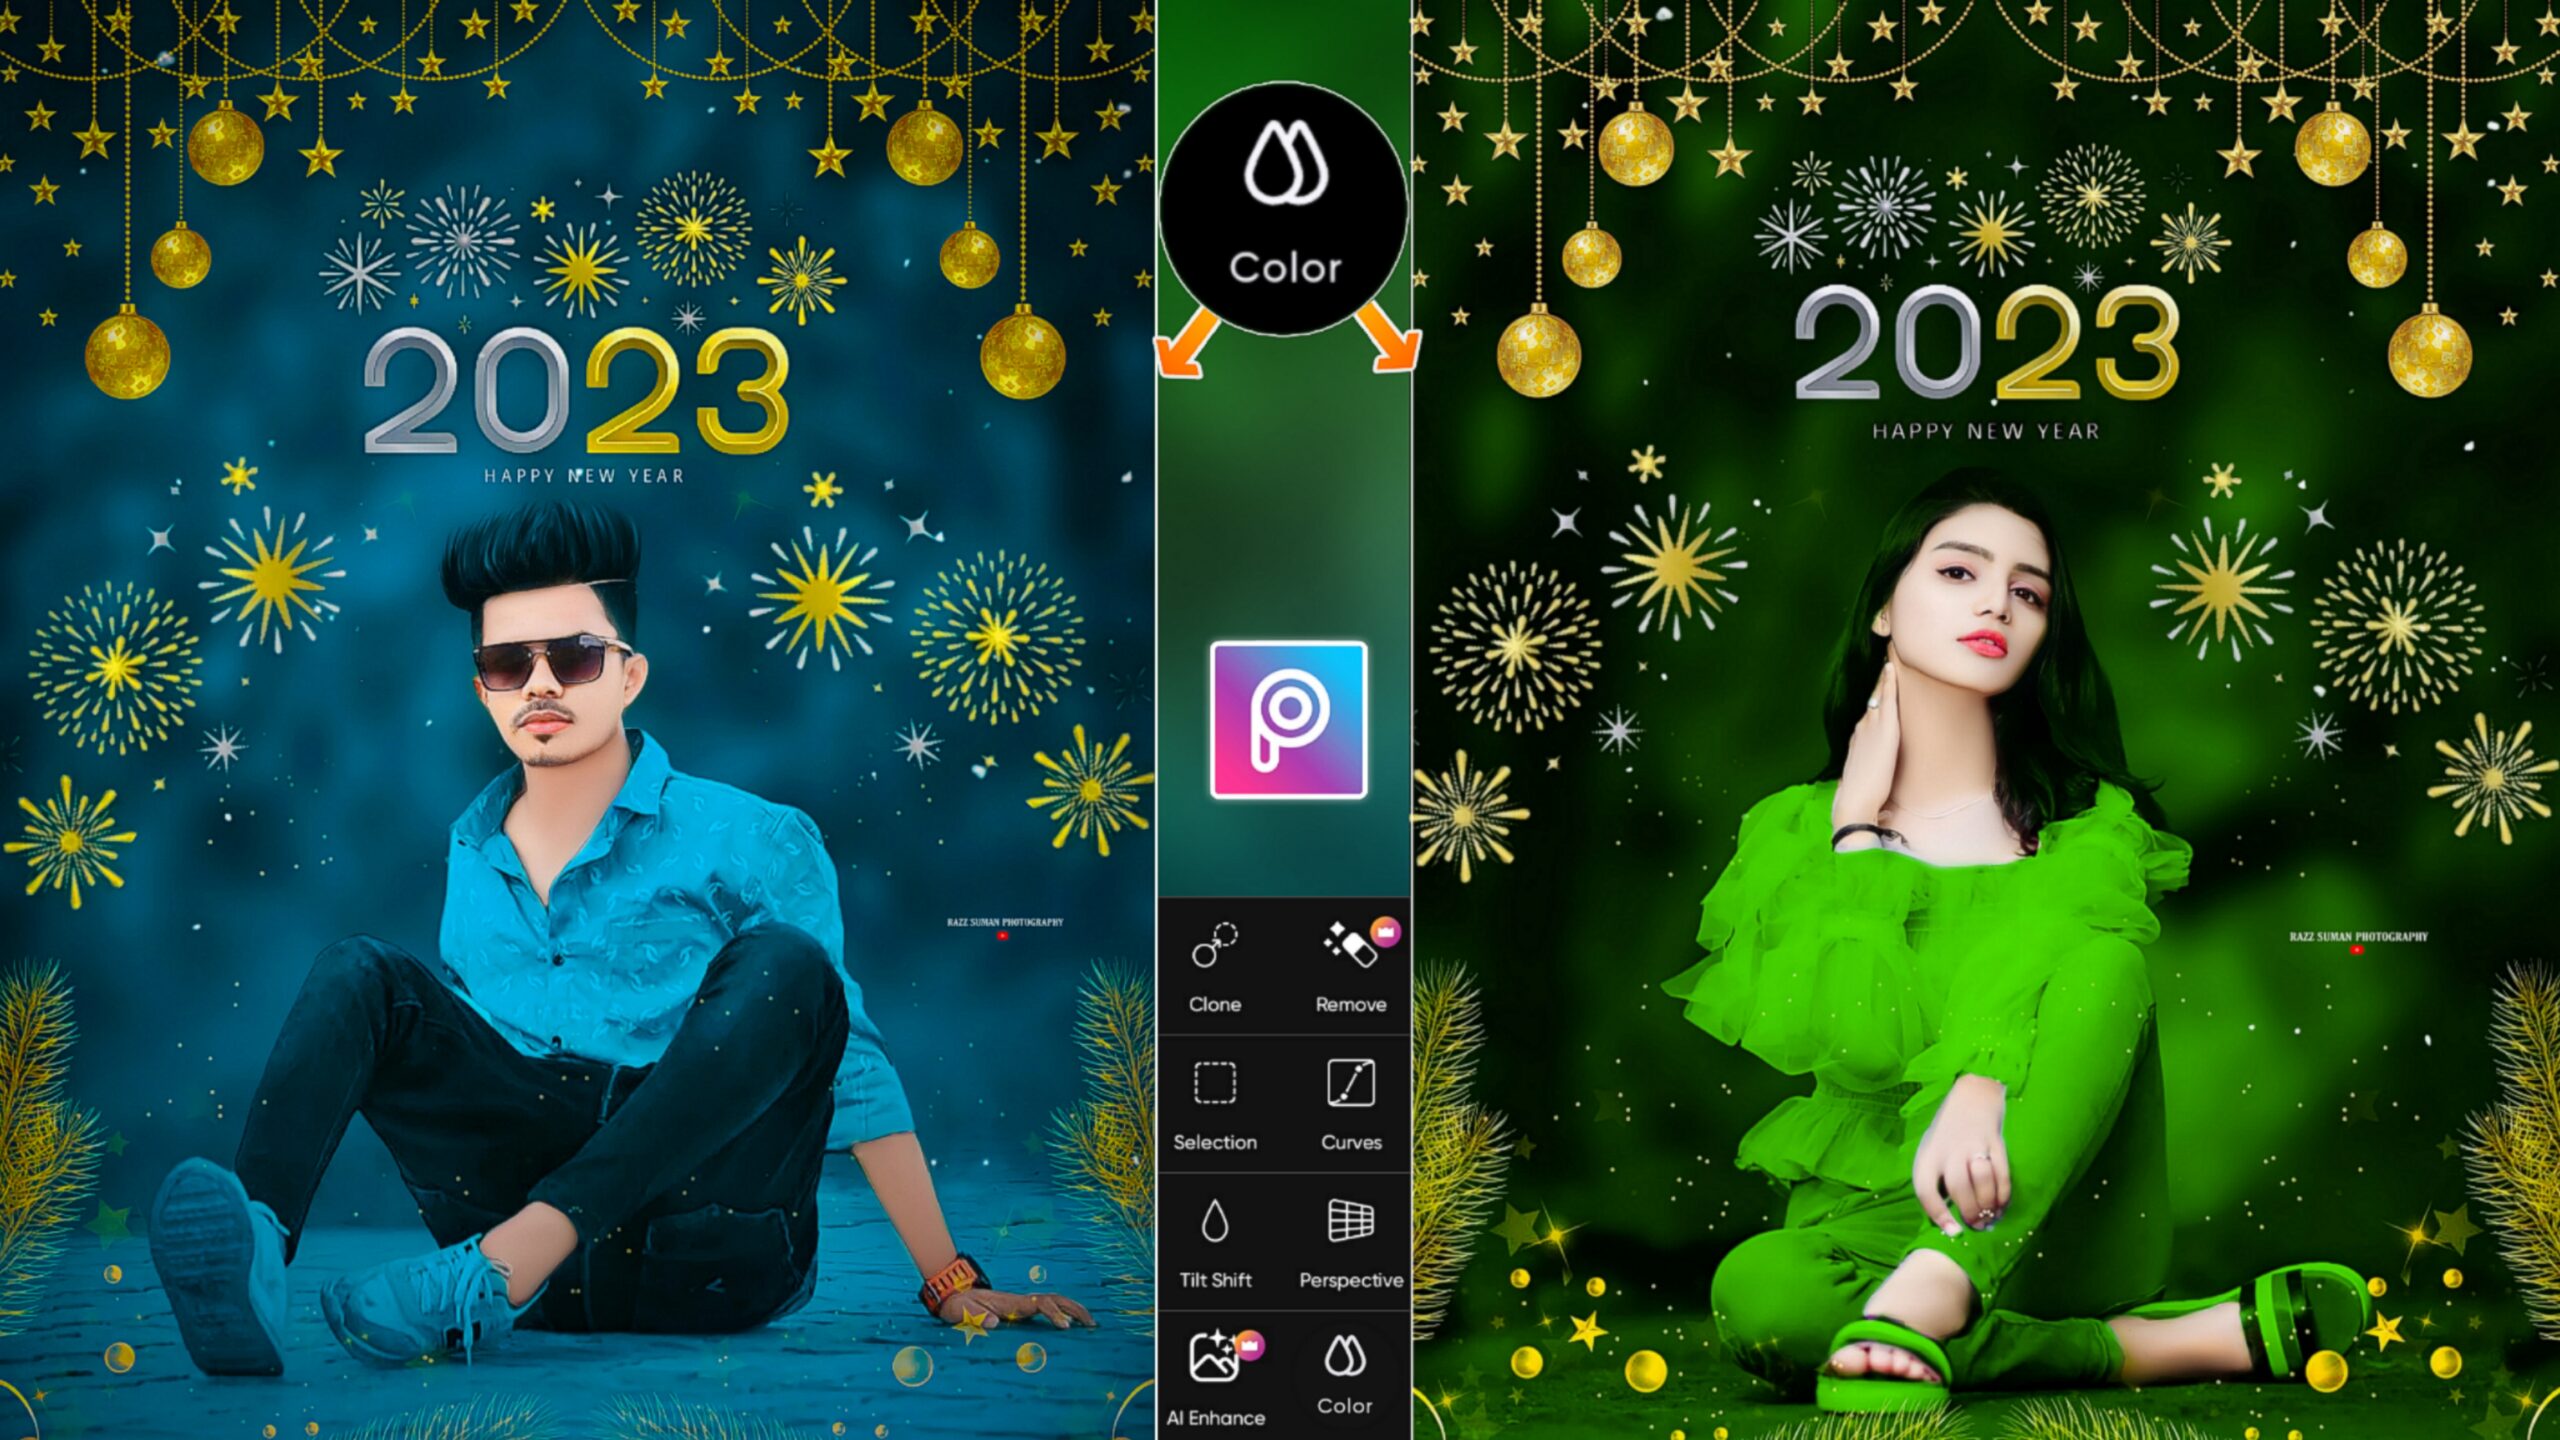 Happy new year photo editing background and png 2023 - Razz Suman  Photography